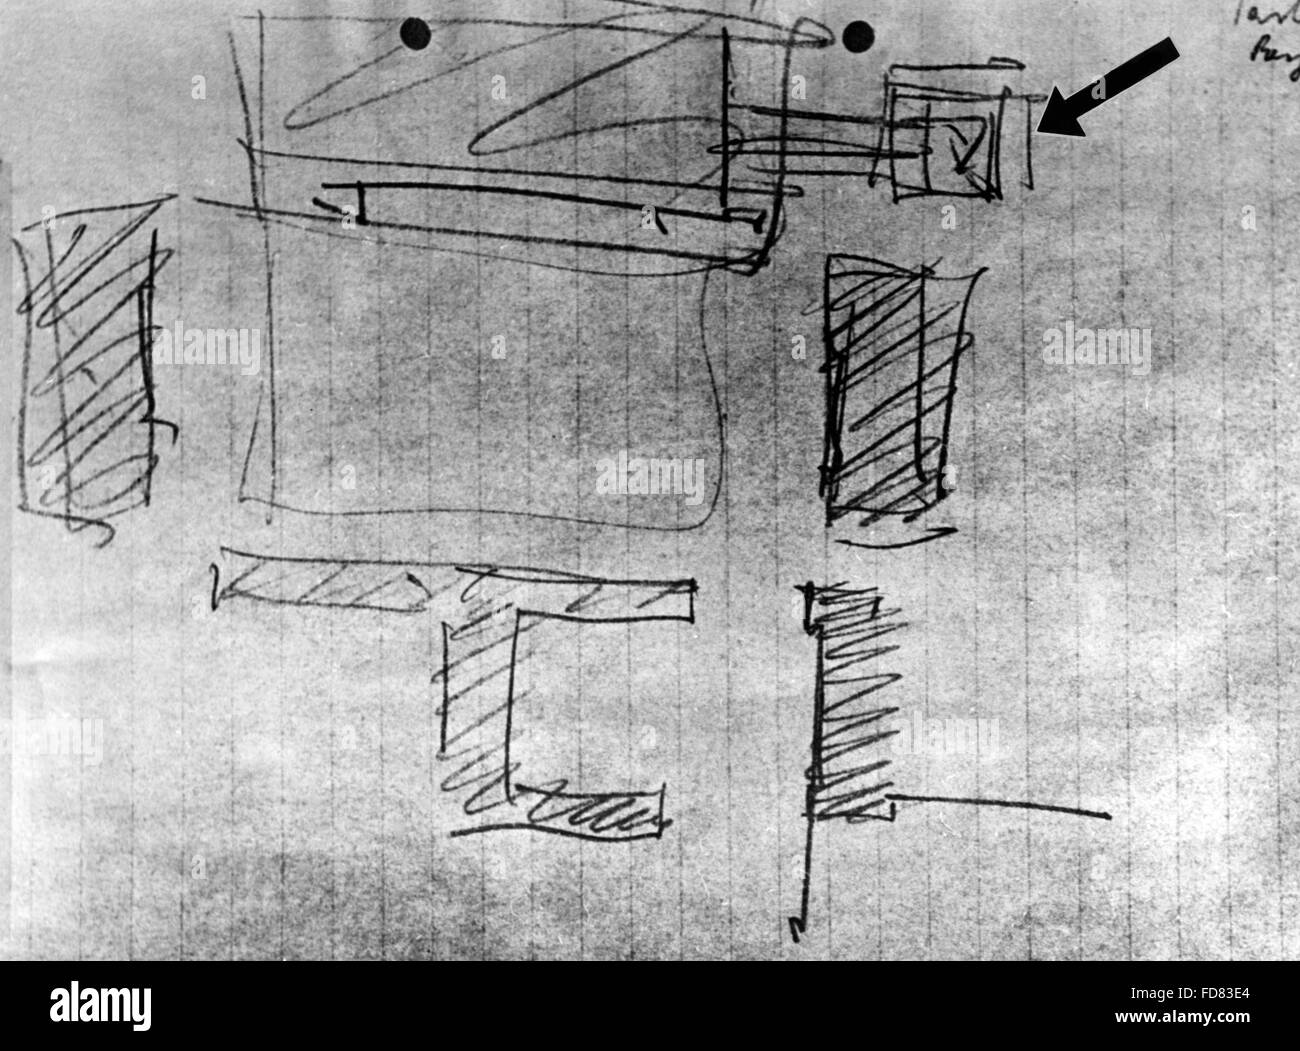 Sketch by Adolf Hitler for the new design of Munich, 1945 Stock Photo